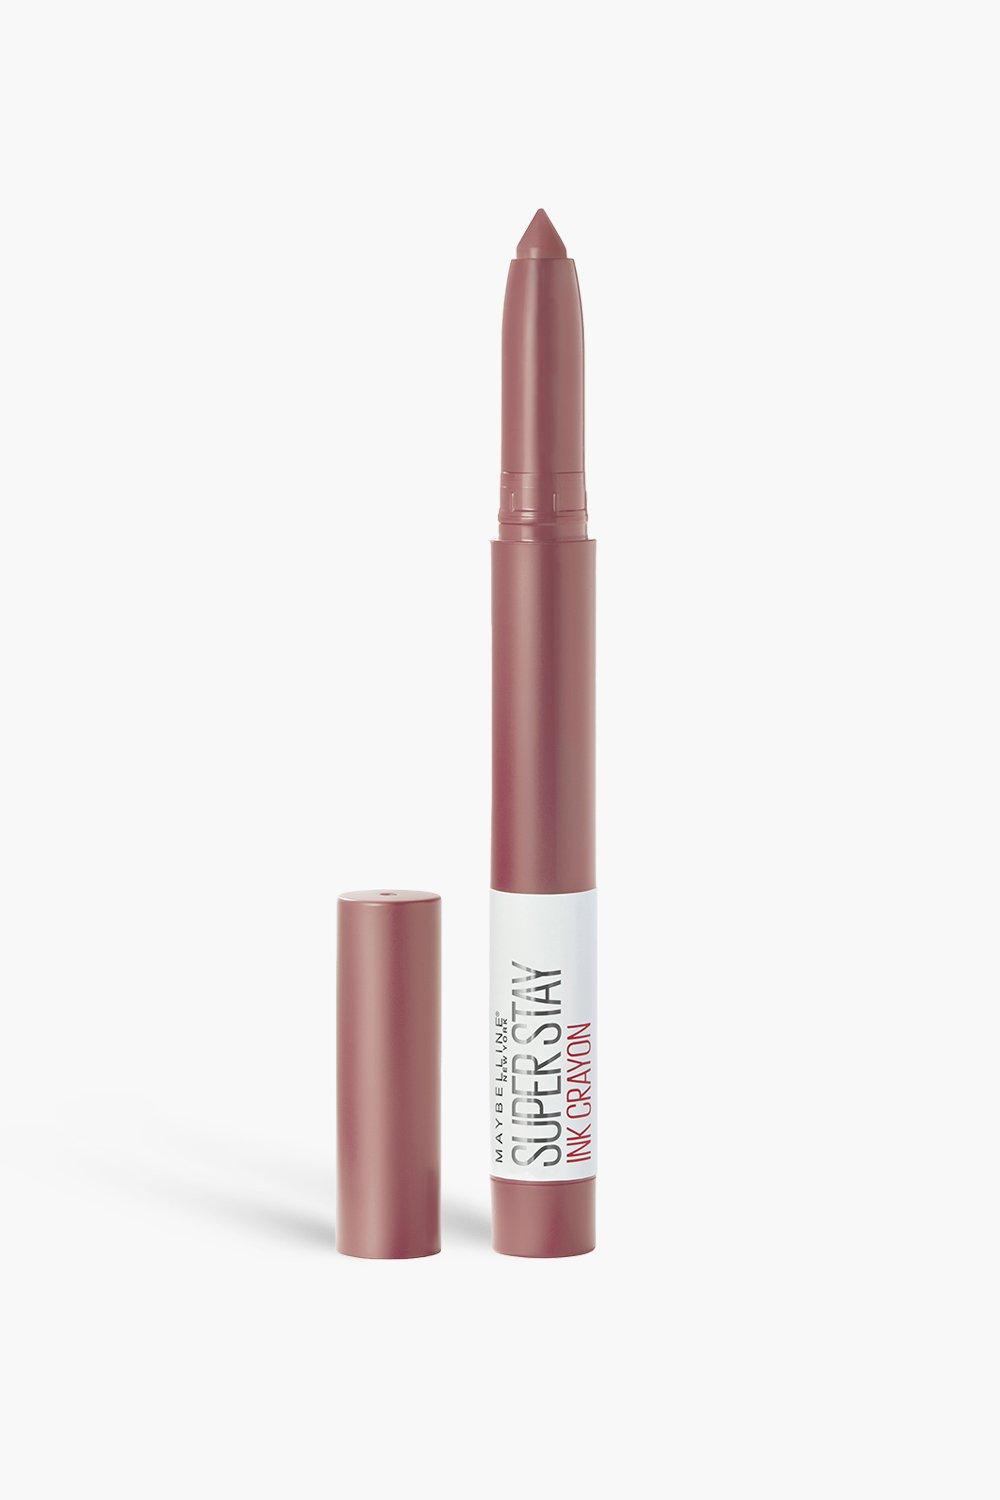 Maybelline Superstay Matte Crayon Lipstick, 15 Lead The Way